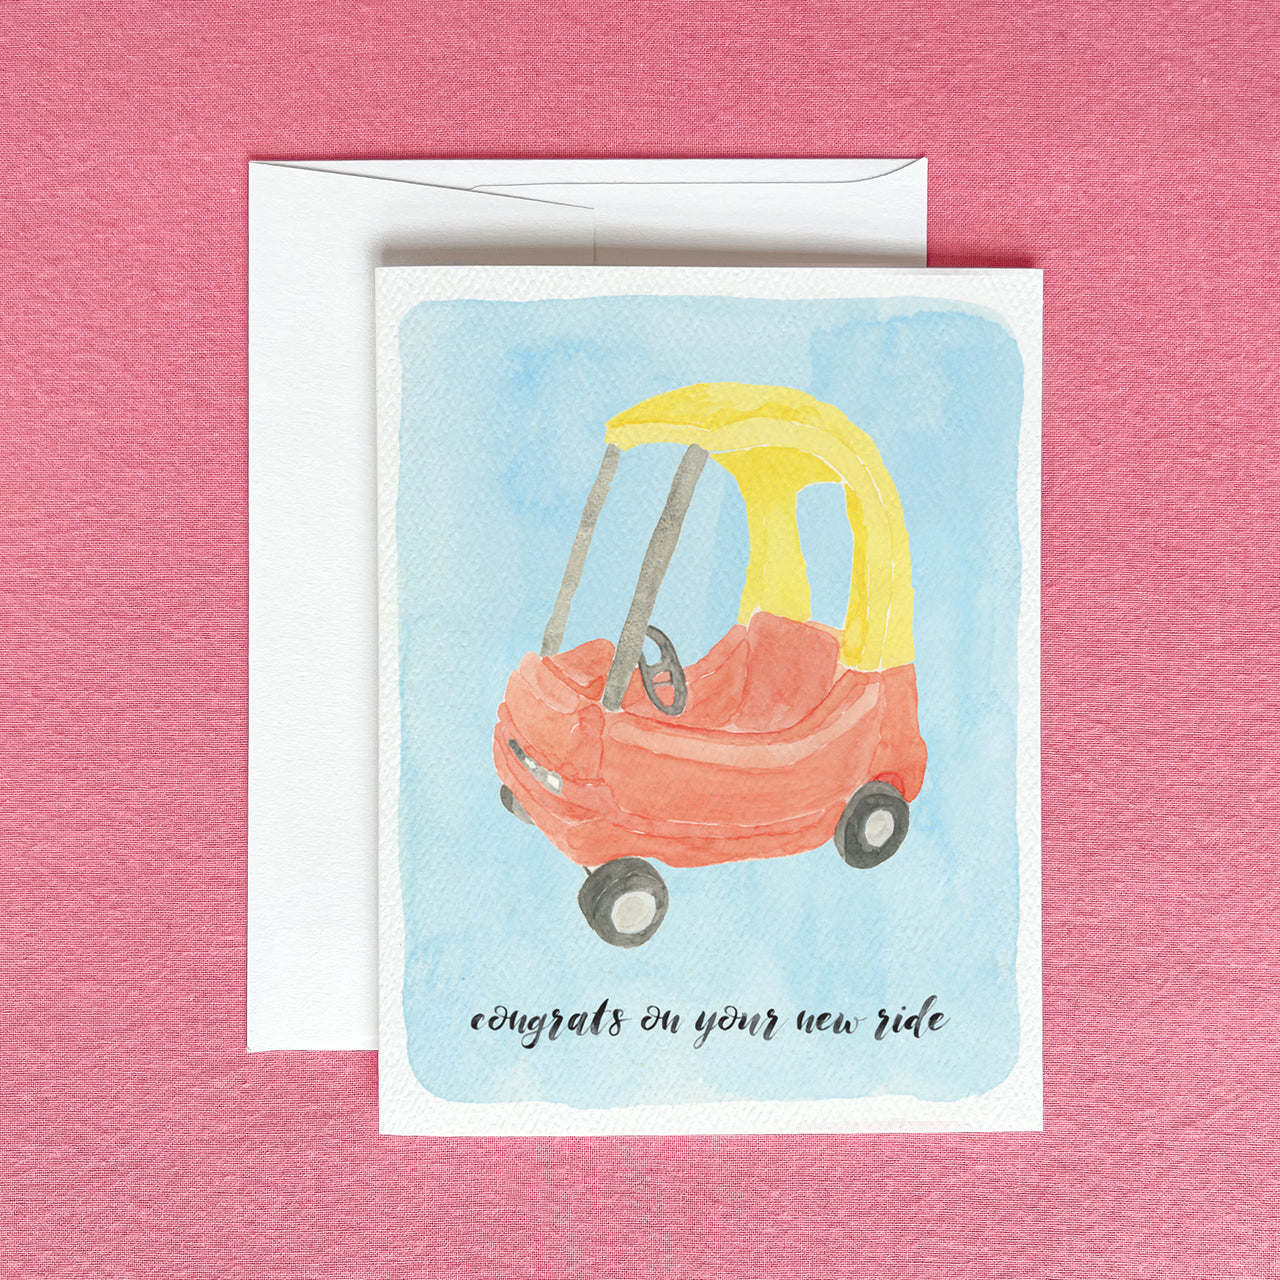 Congrats on Your New Ride Greeting Card by Gert & Co